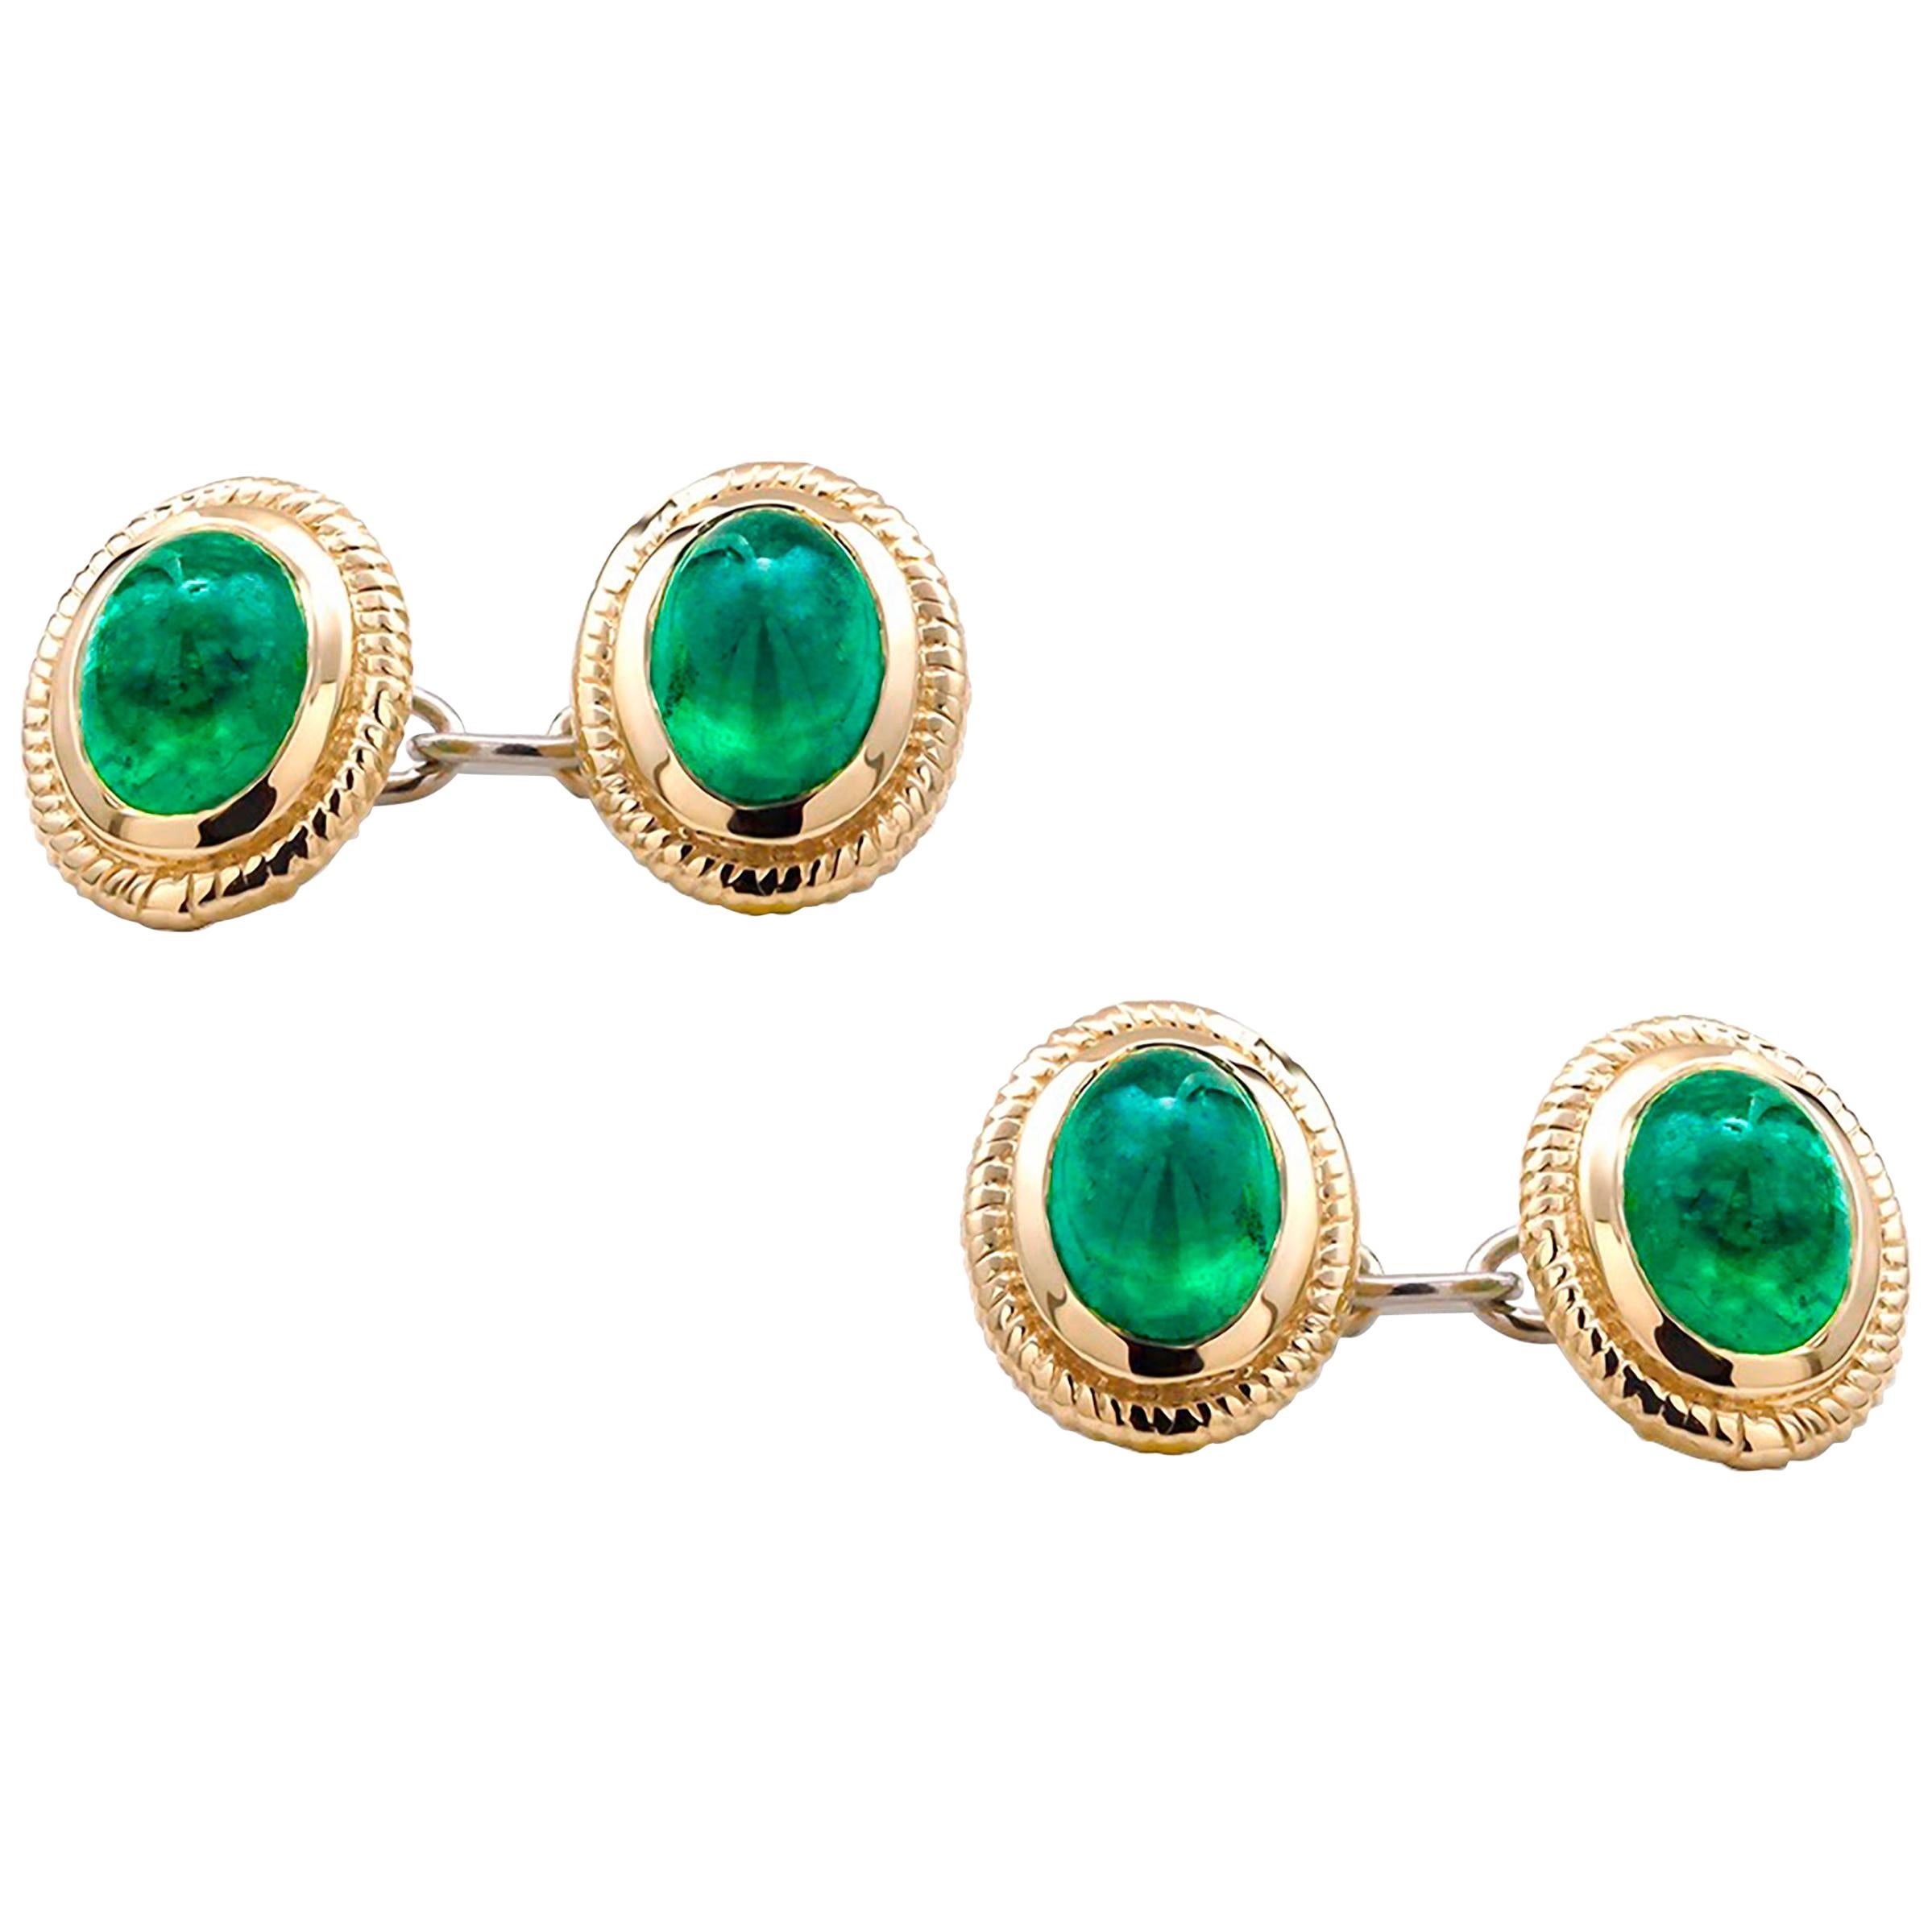 Modern Matching Pair of Cabochon Emerald Gents Double Sides Chain Link Cufflinks